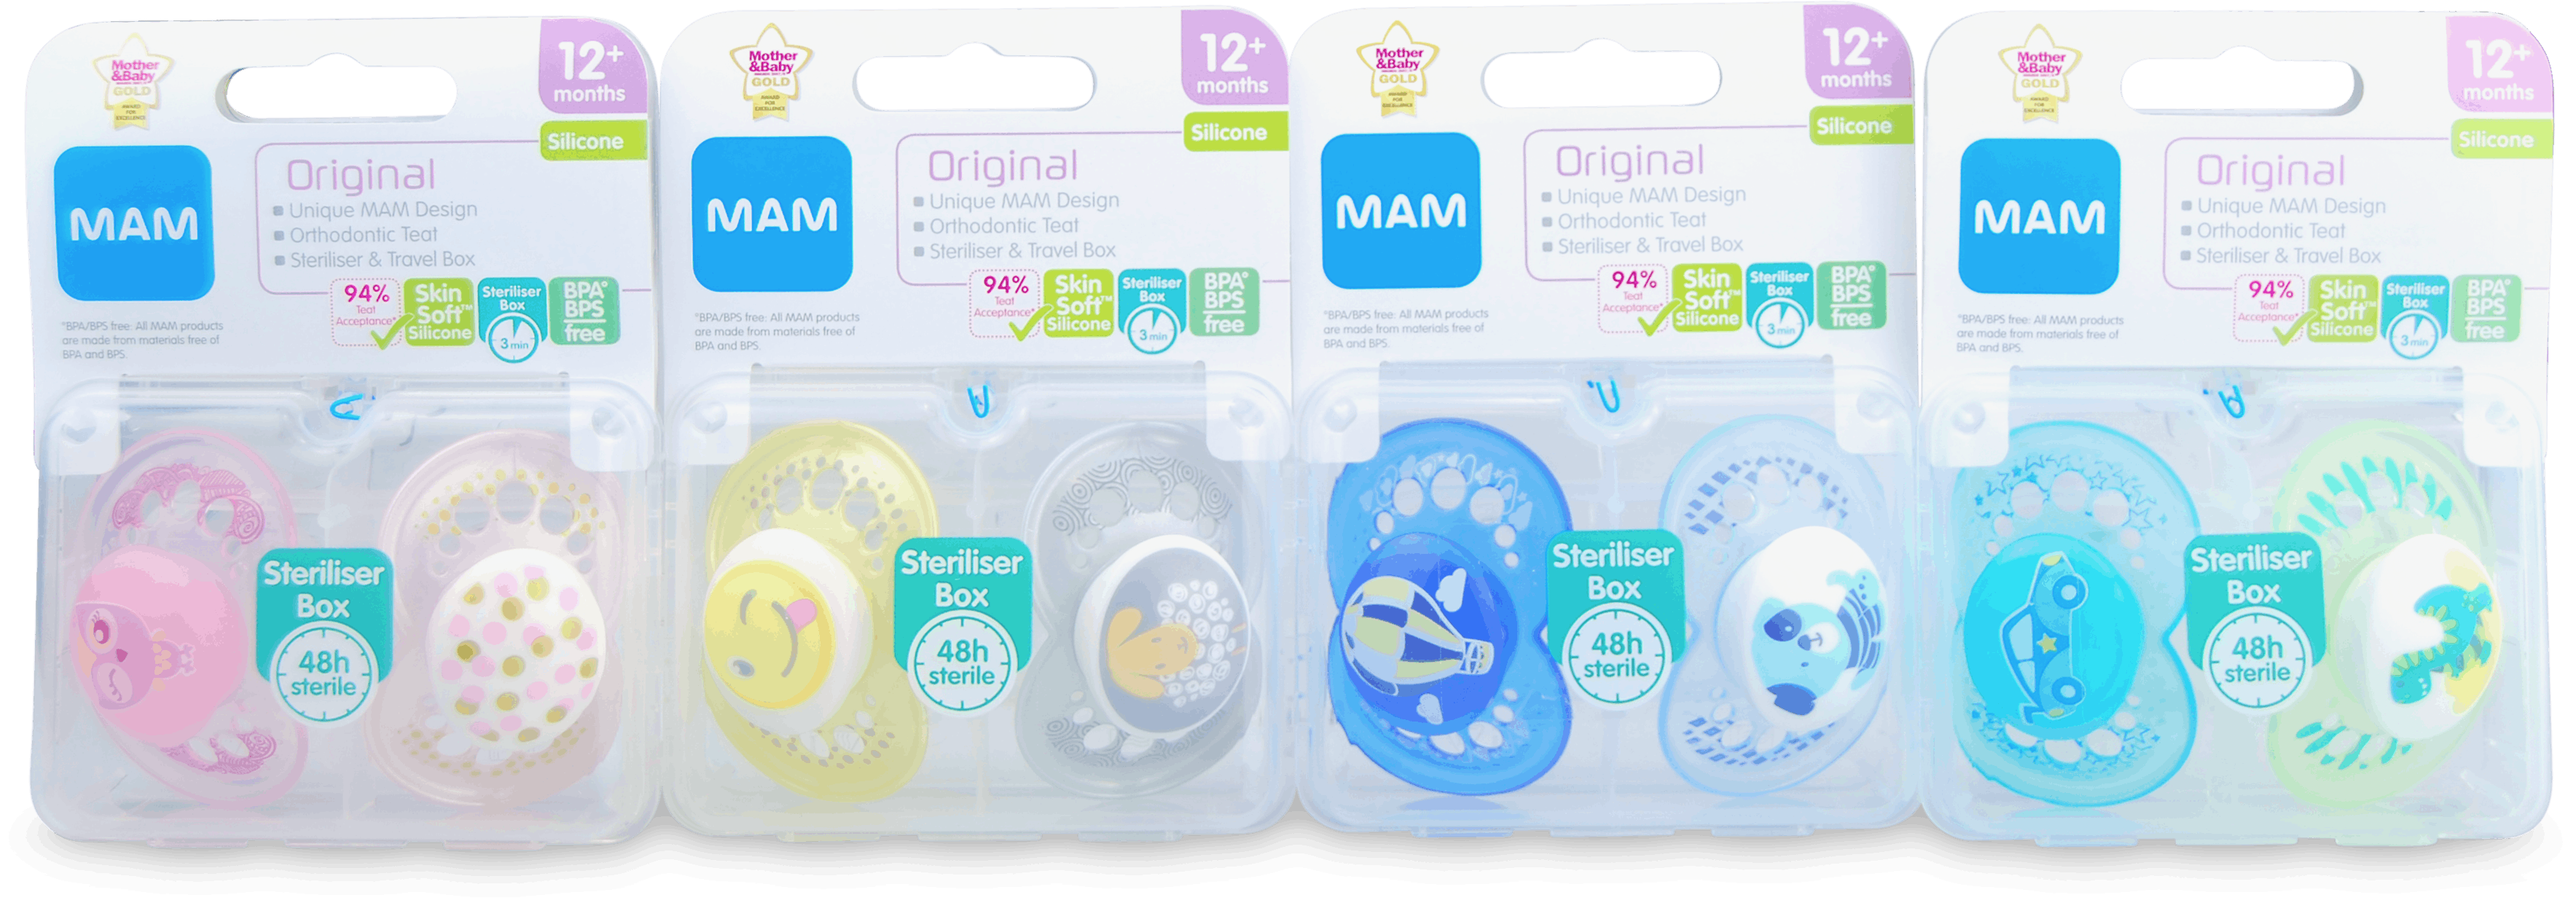 mam 12 month soother